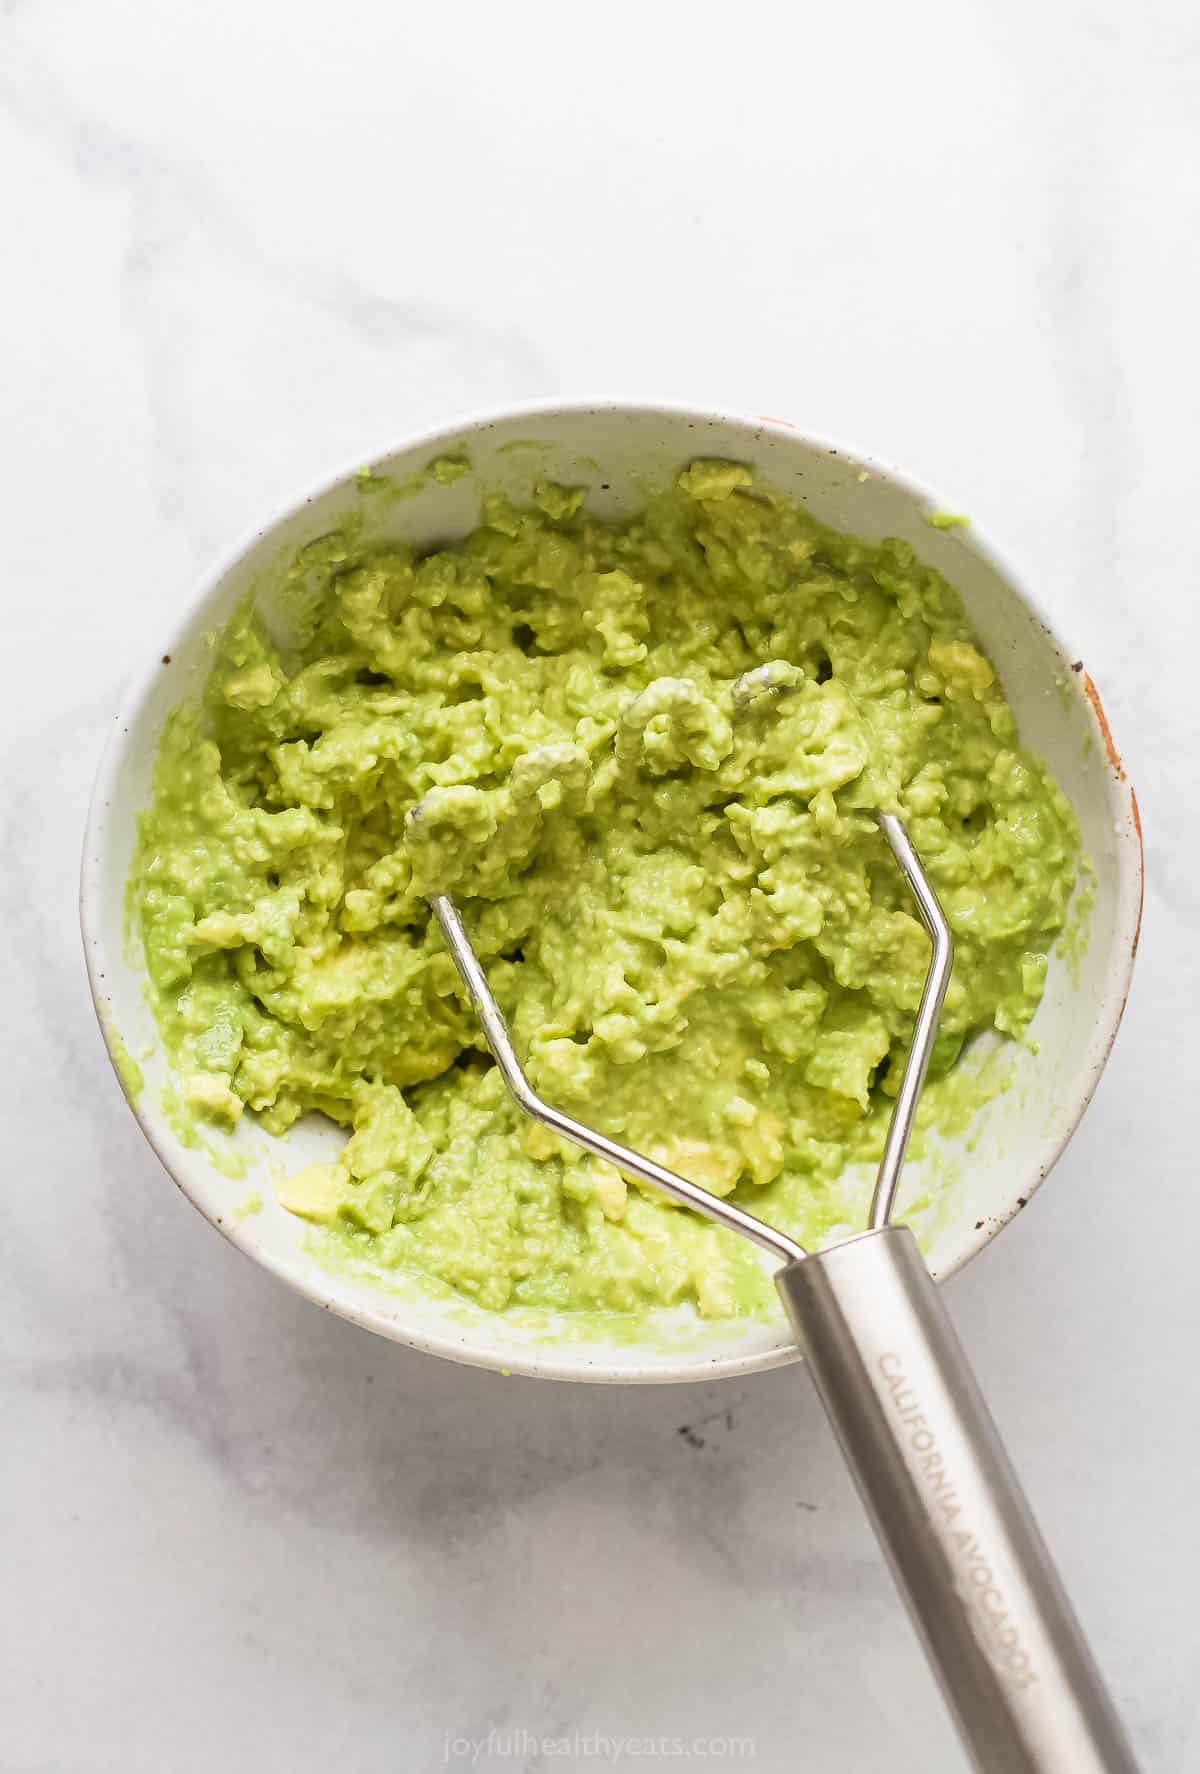 Mashed guacamole in a bowl.